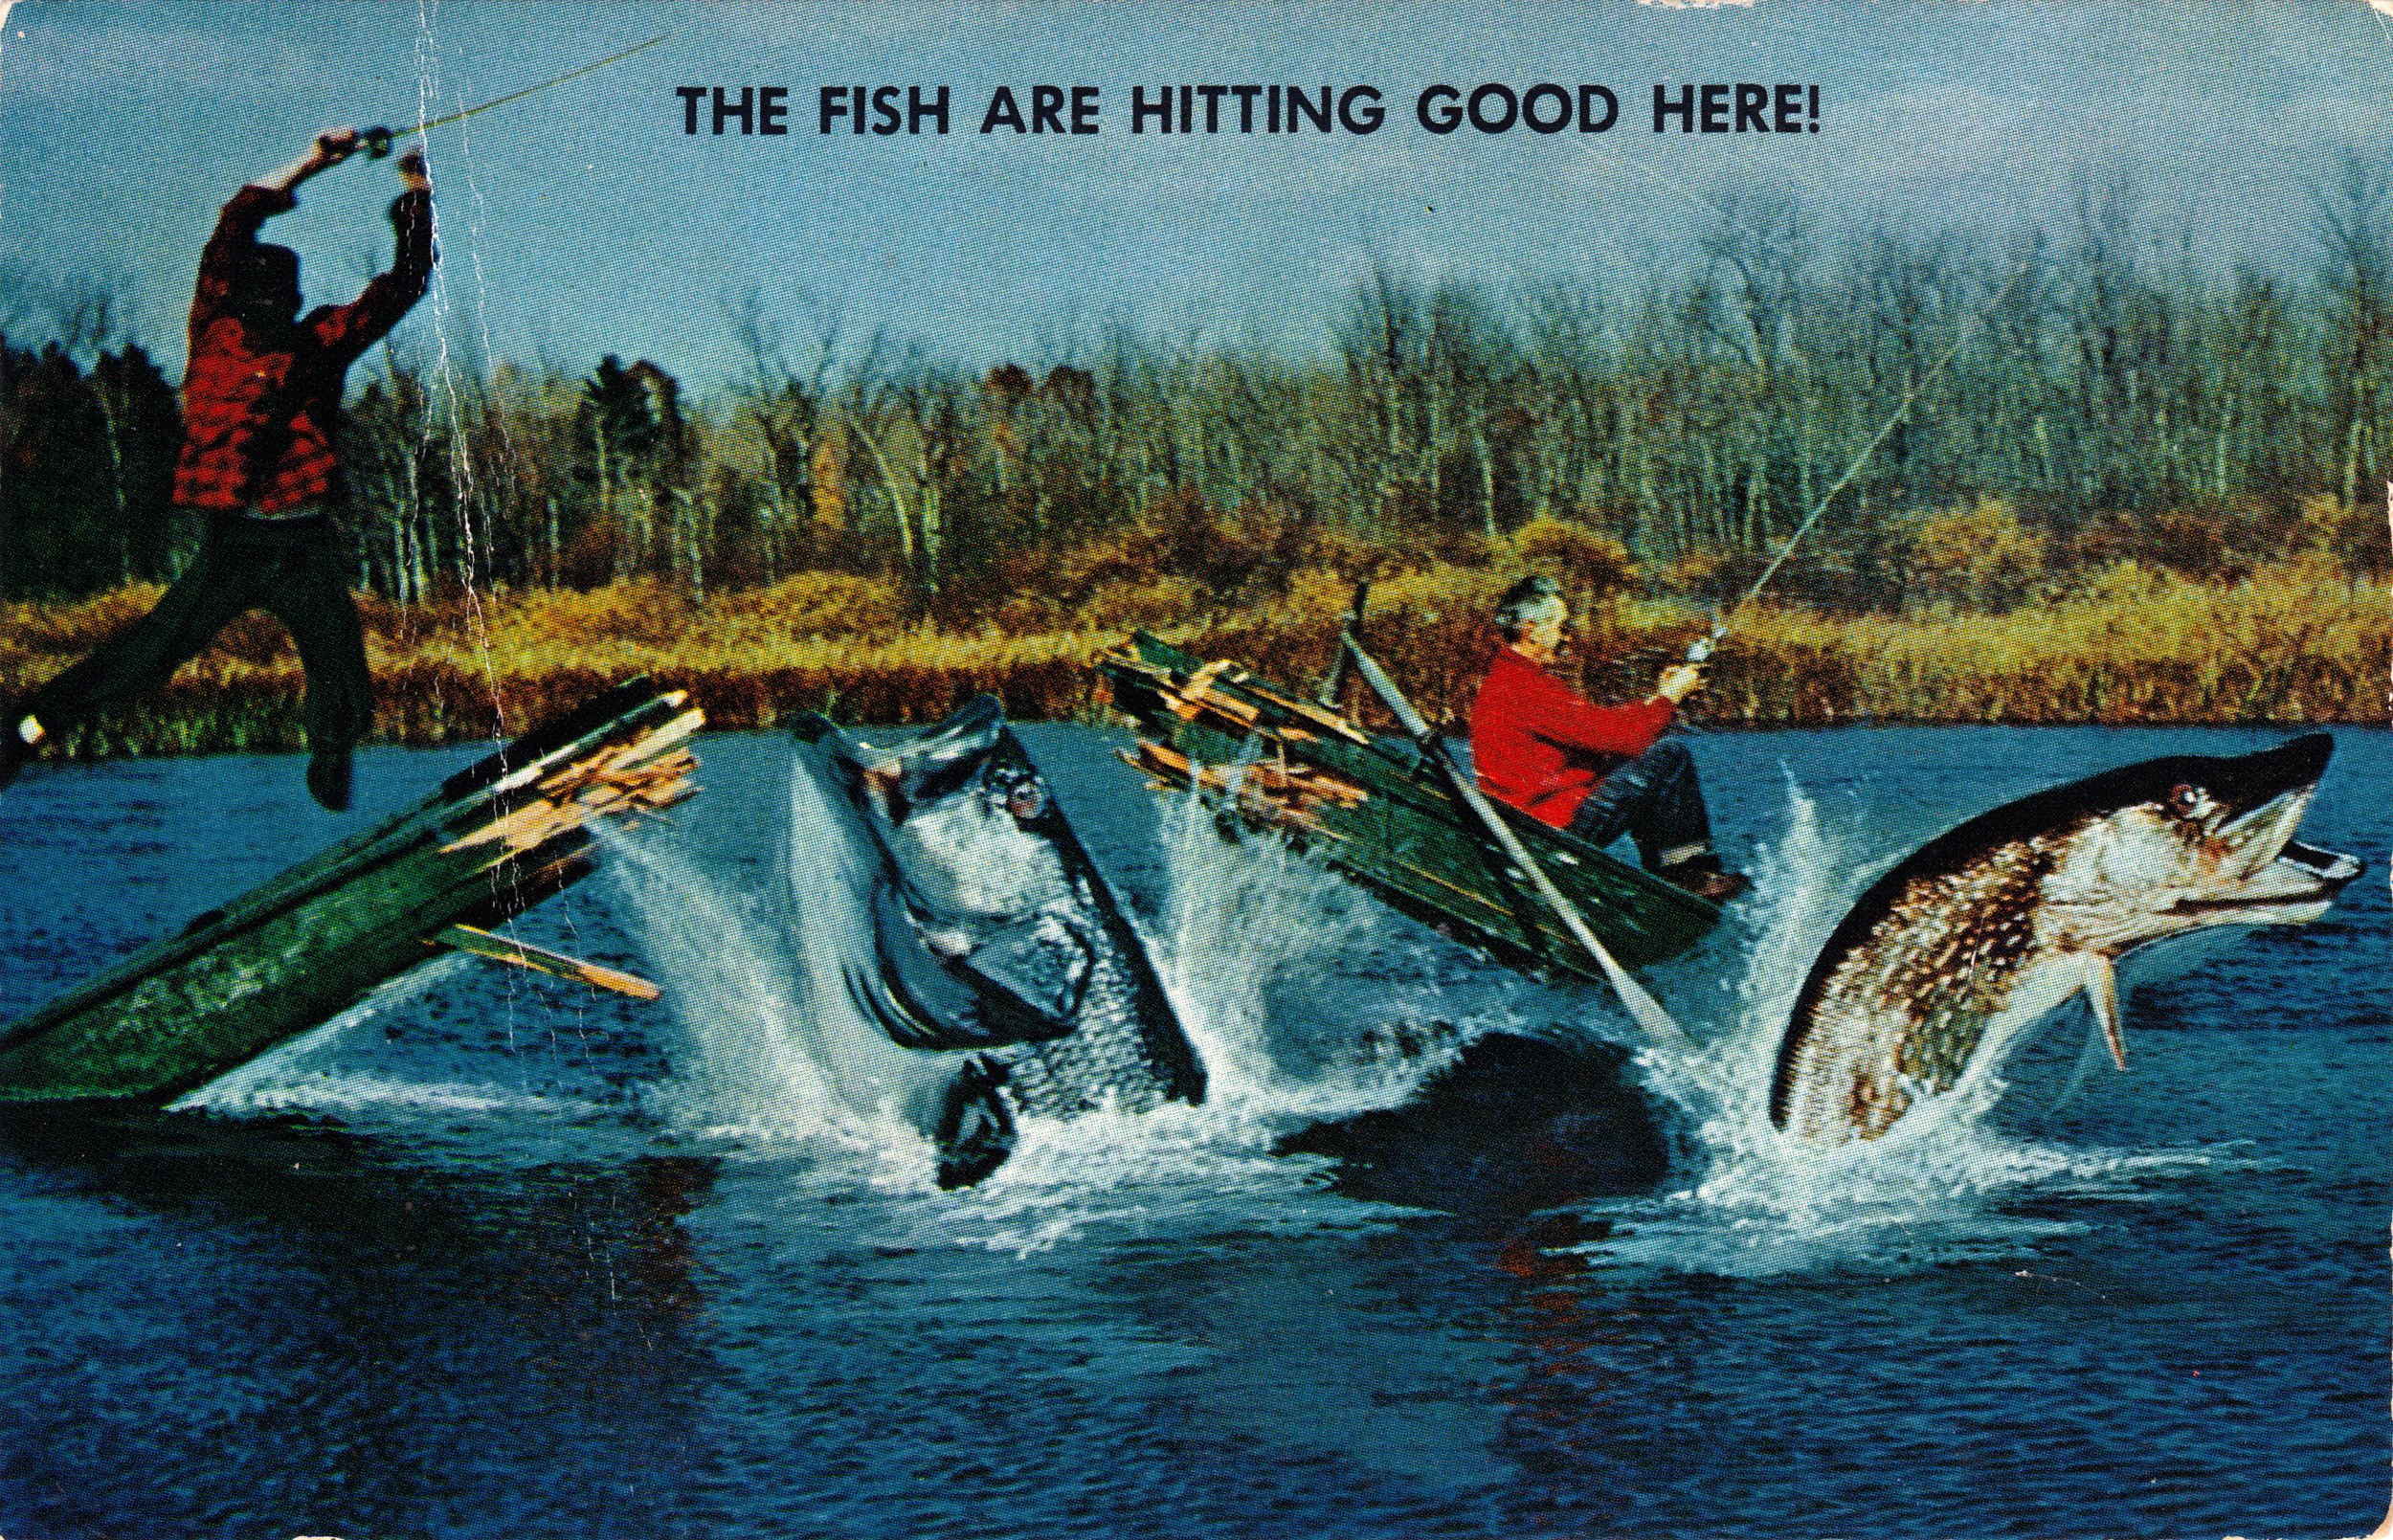 postcard, Paper, Poster, Advertising, Vintage, Retro, Antique, Humor, Funny, Comedy, F, Fishing Wallpaper